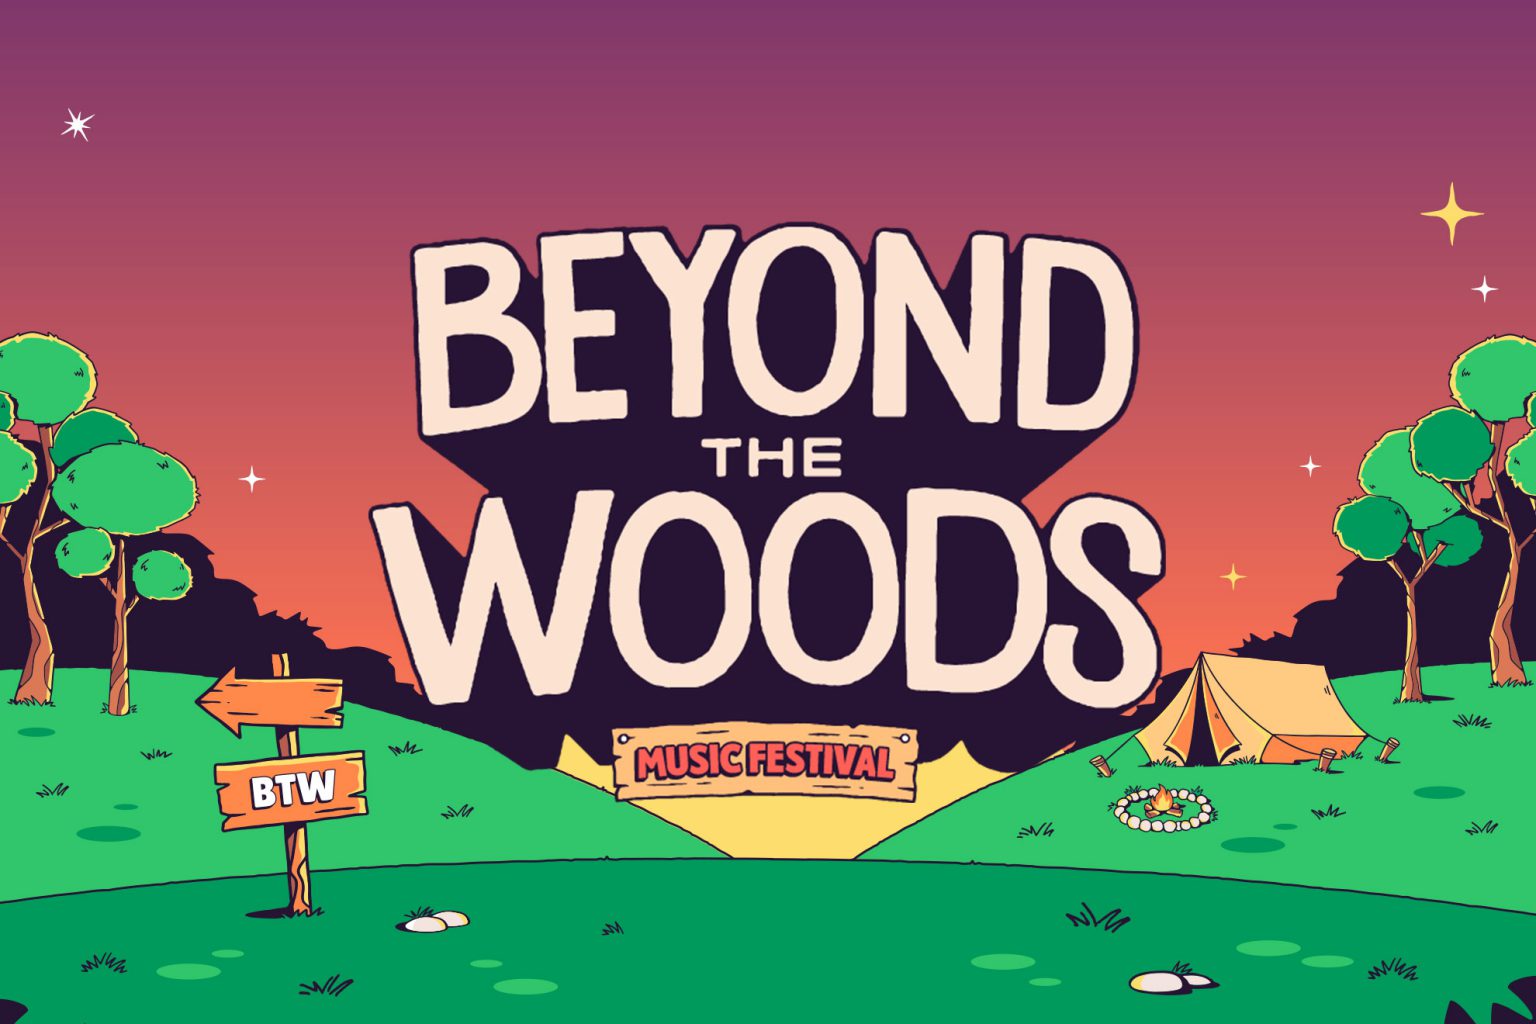 Beyond The Woods Festival